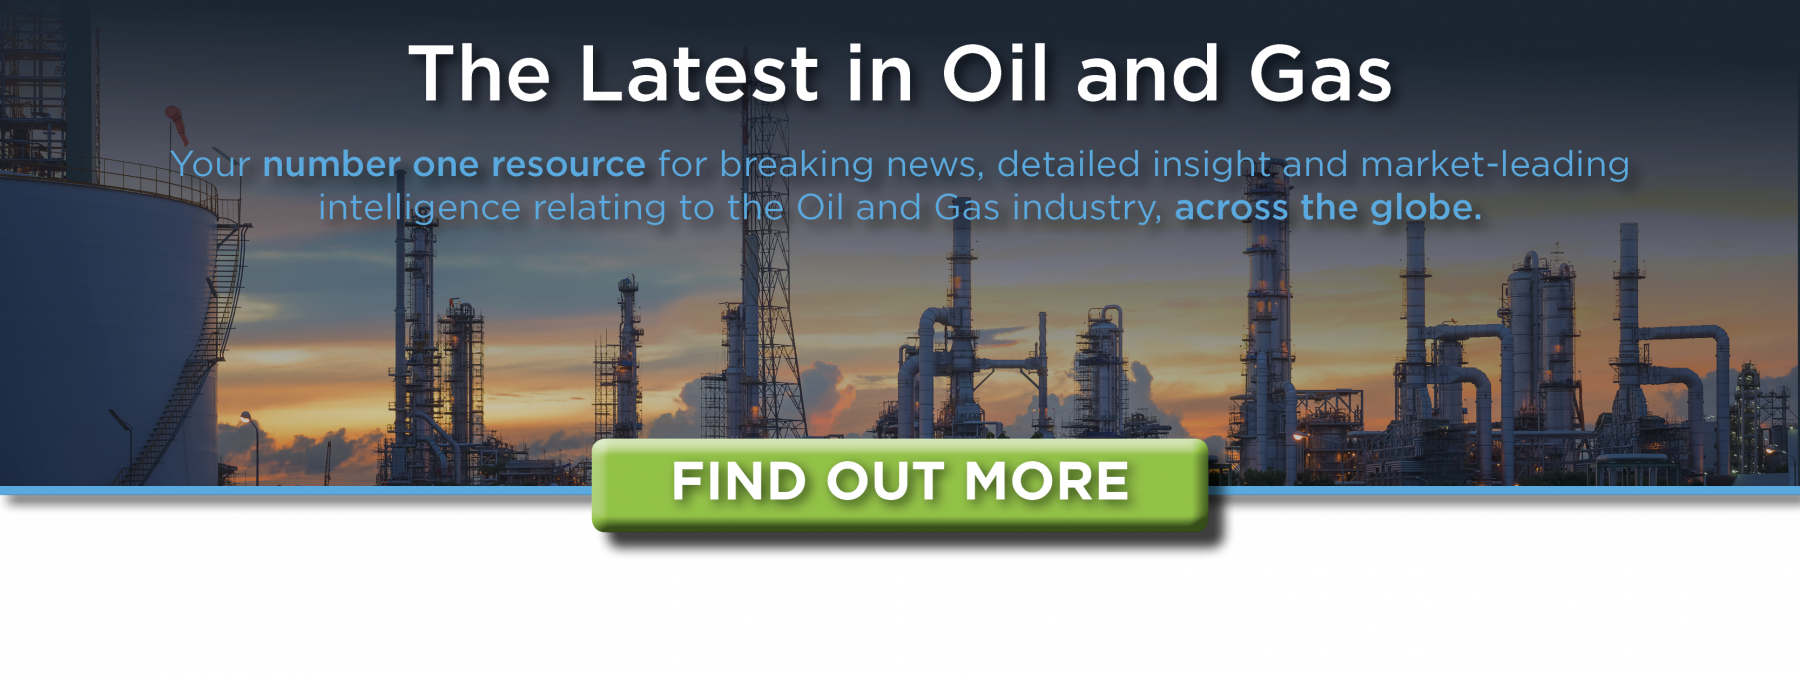 The latest oil and gas news from the UK and worldwide